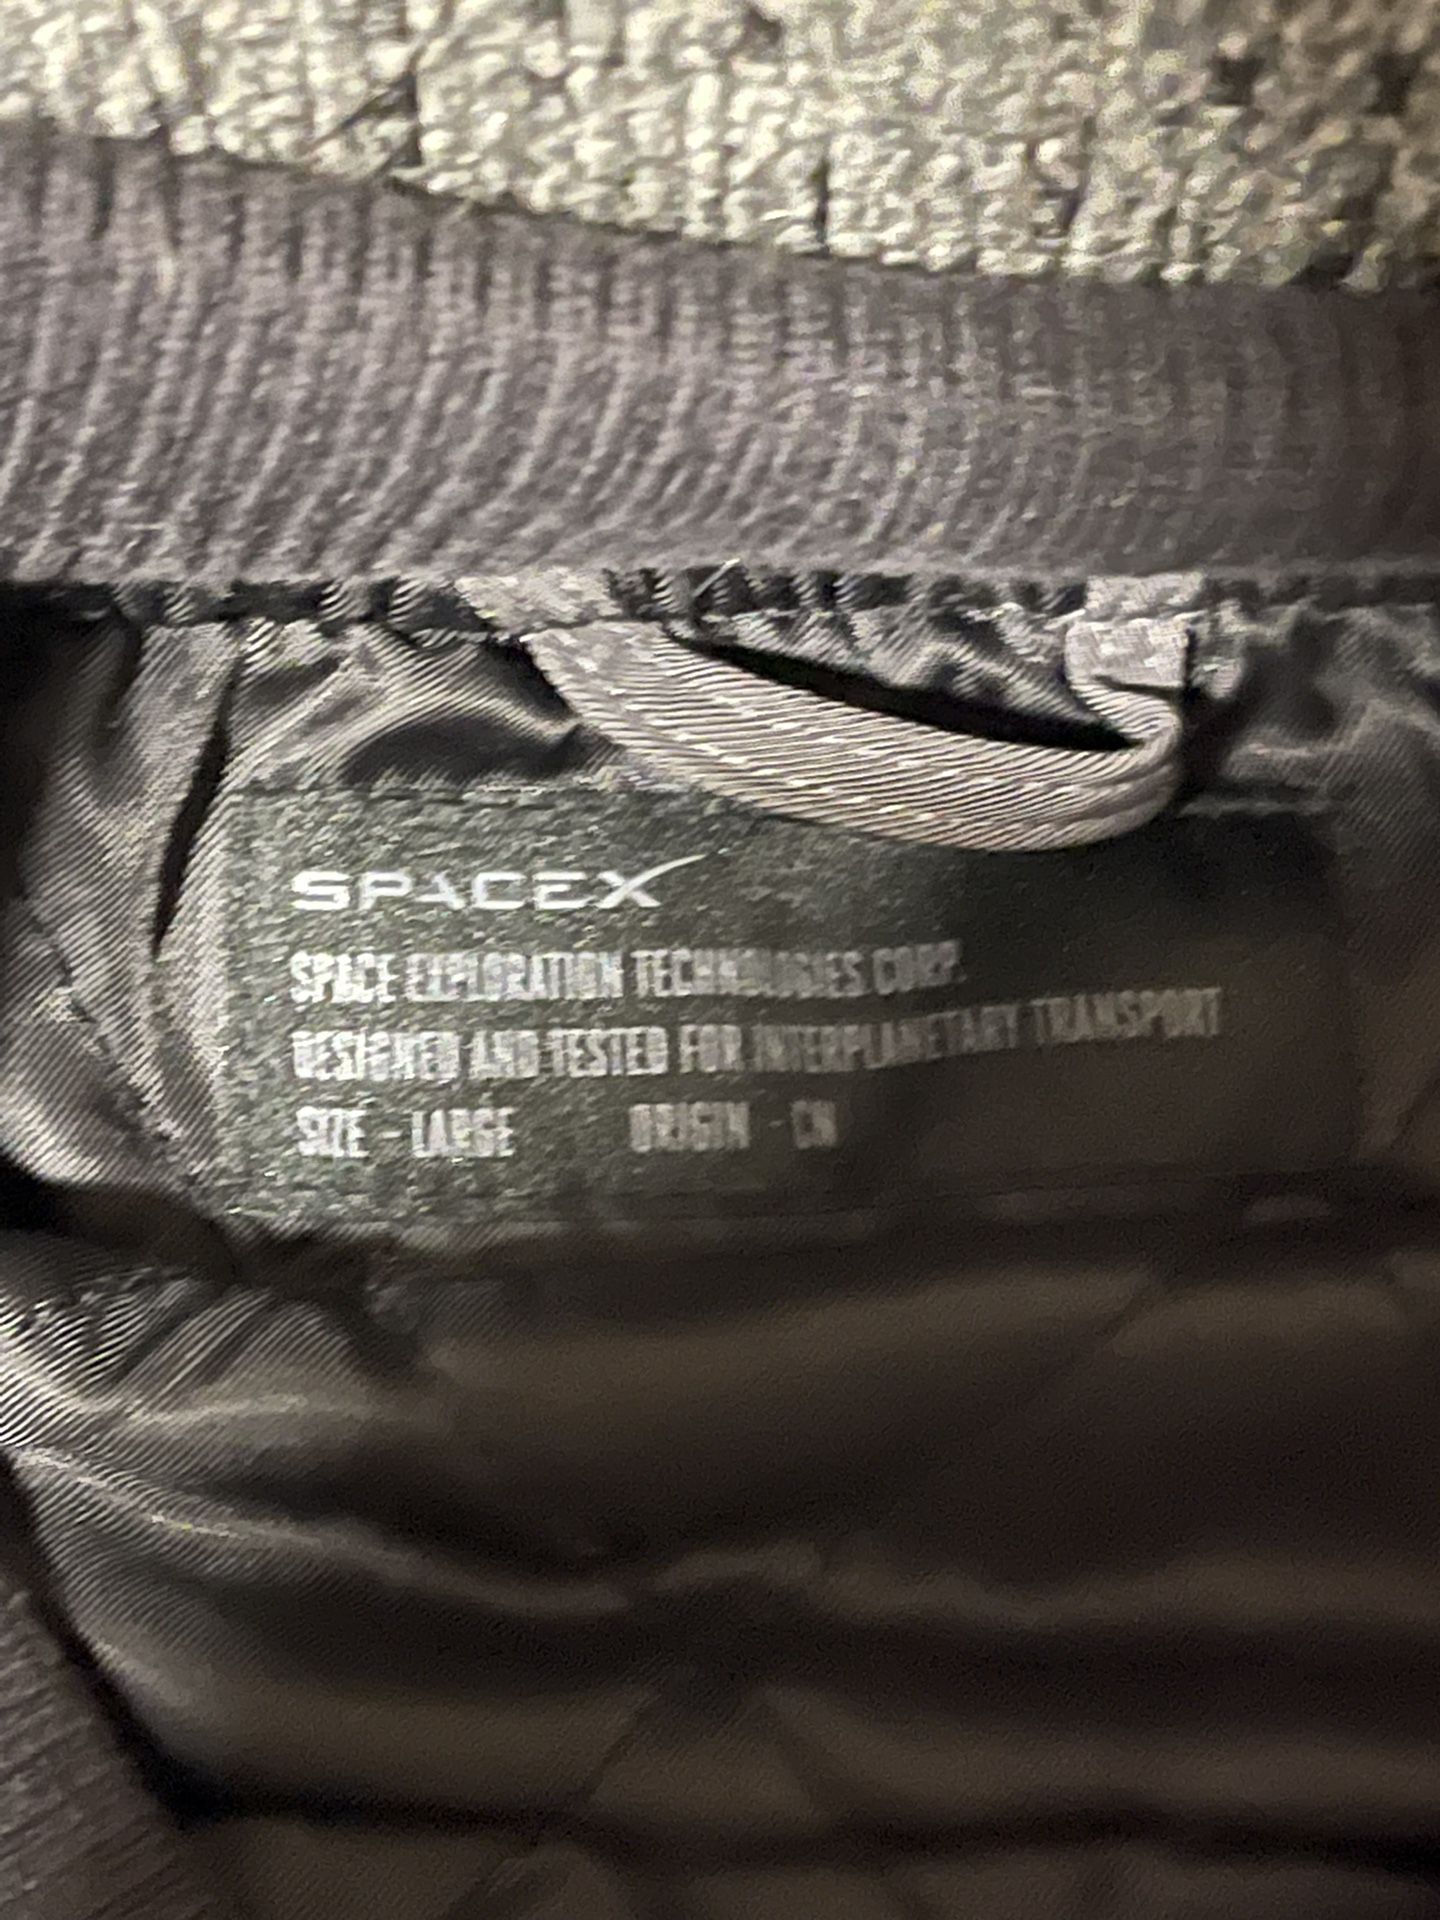 Limited Edition SpaceX Bomber Jacket Space Gray size: Large